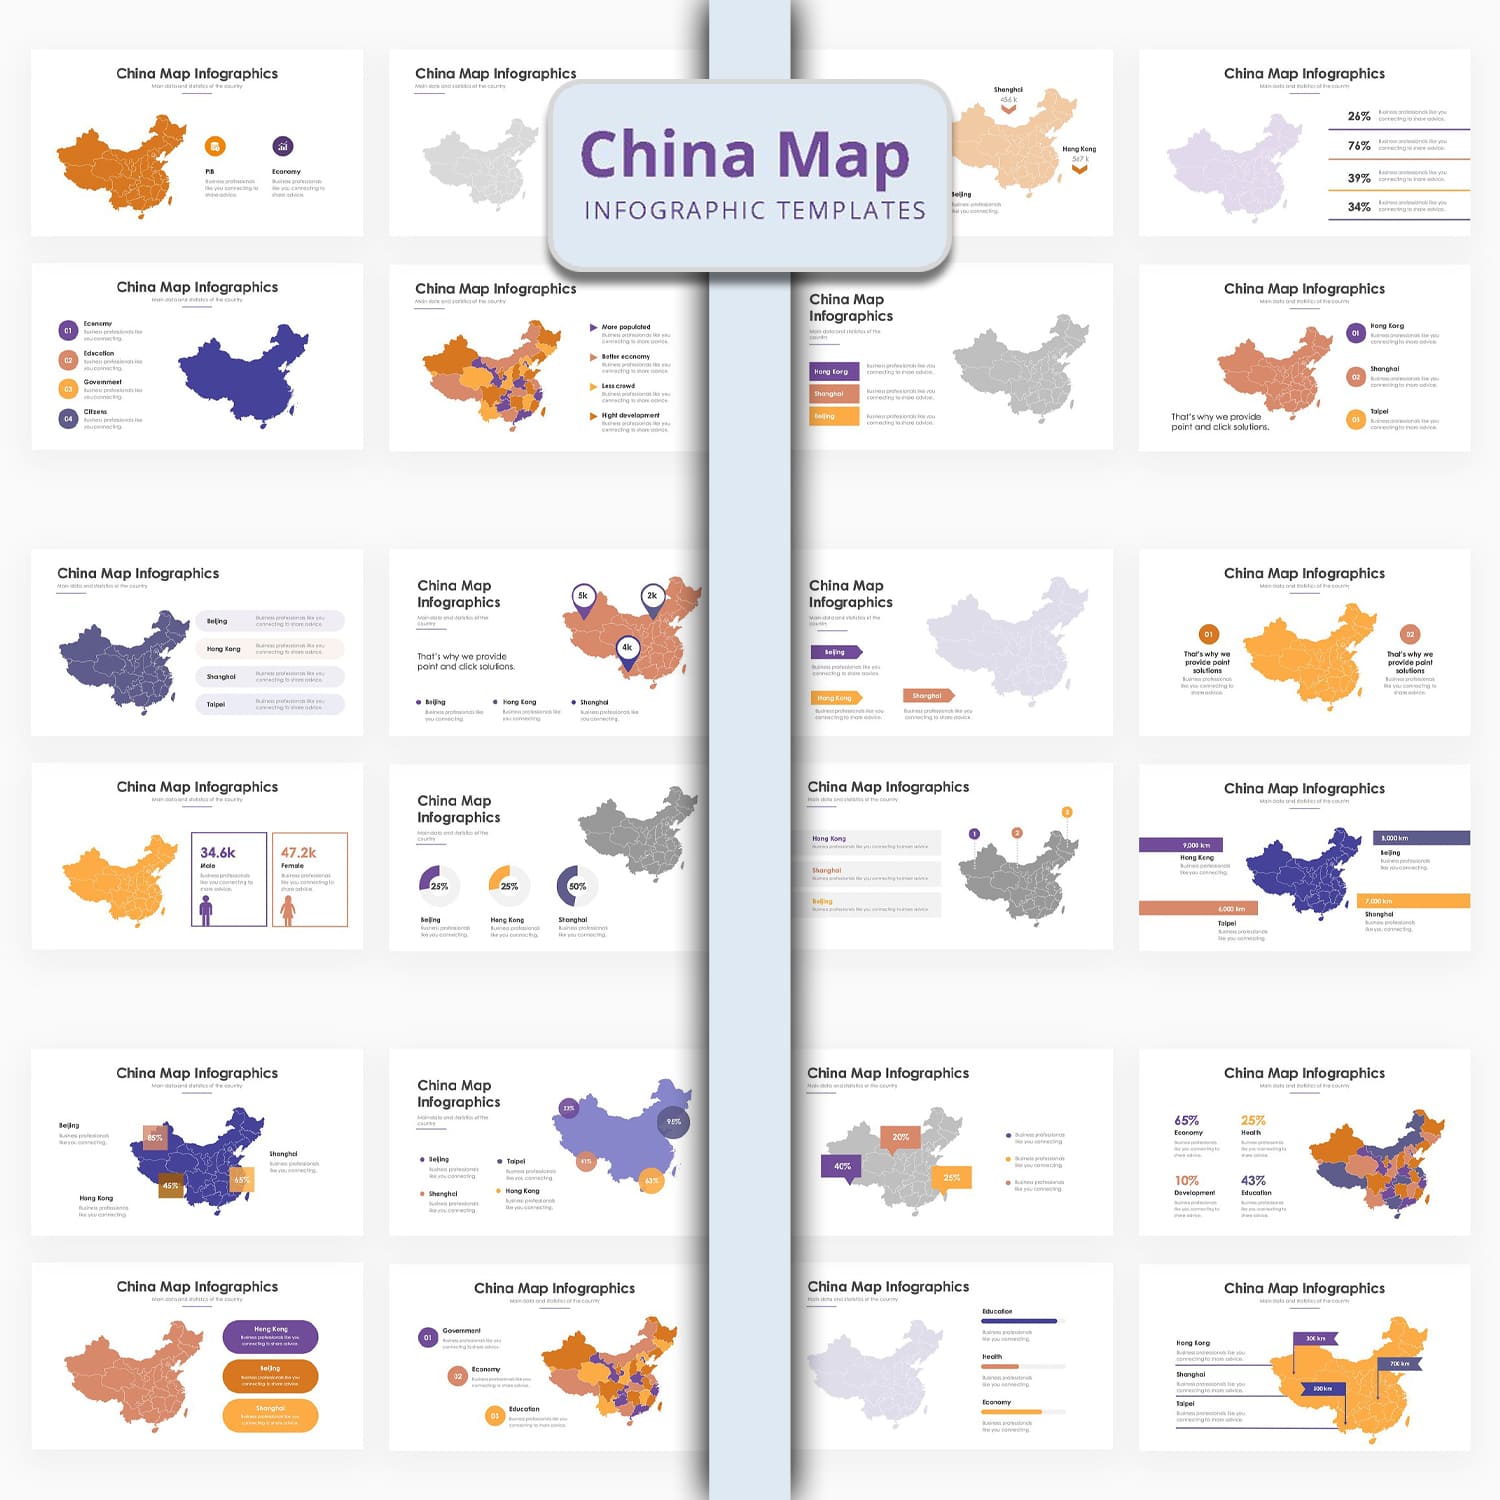 China Map Infographics - PowerPoint cover image.